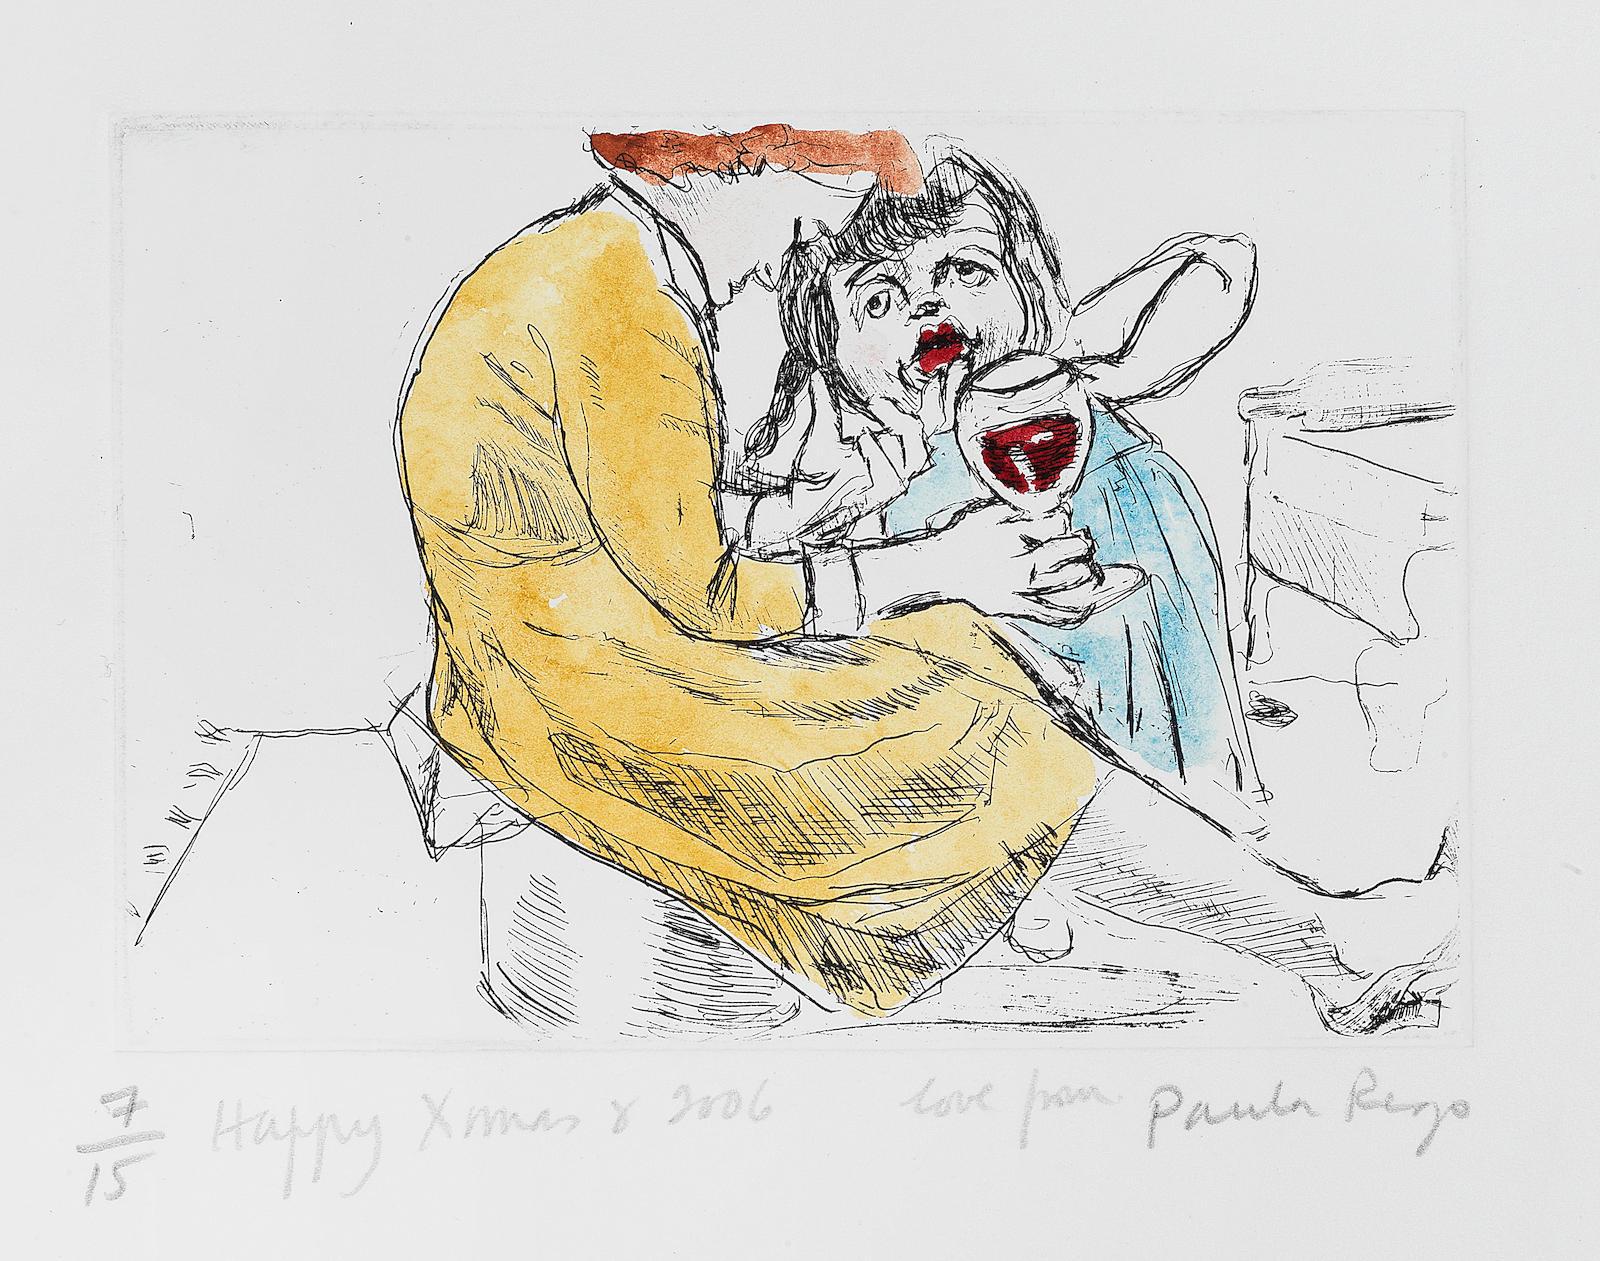 What is Paula Rego known for?